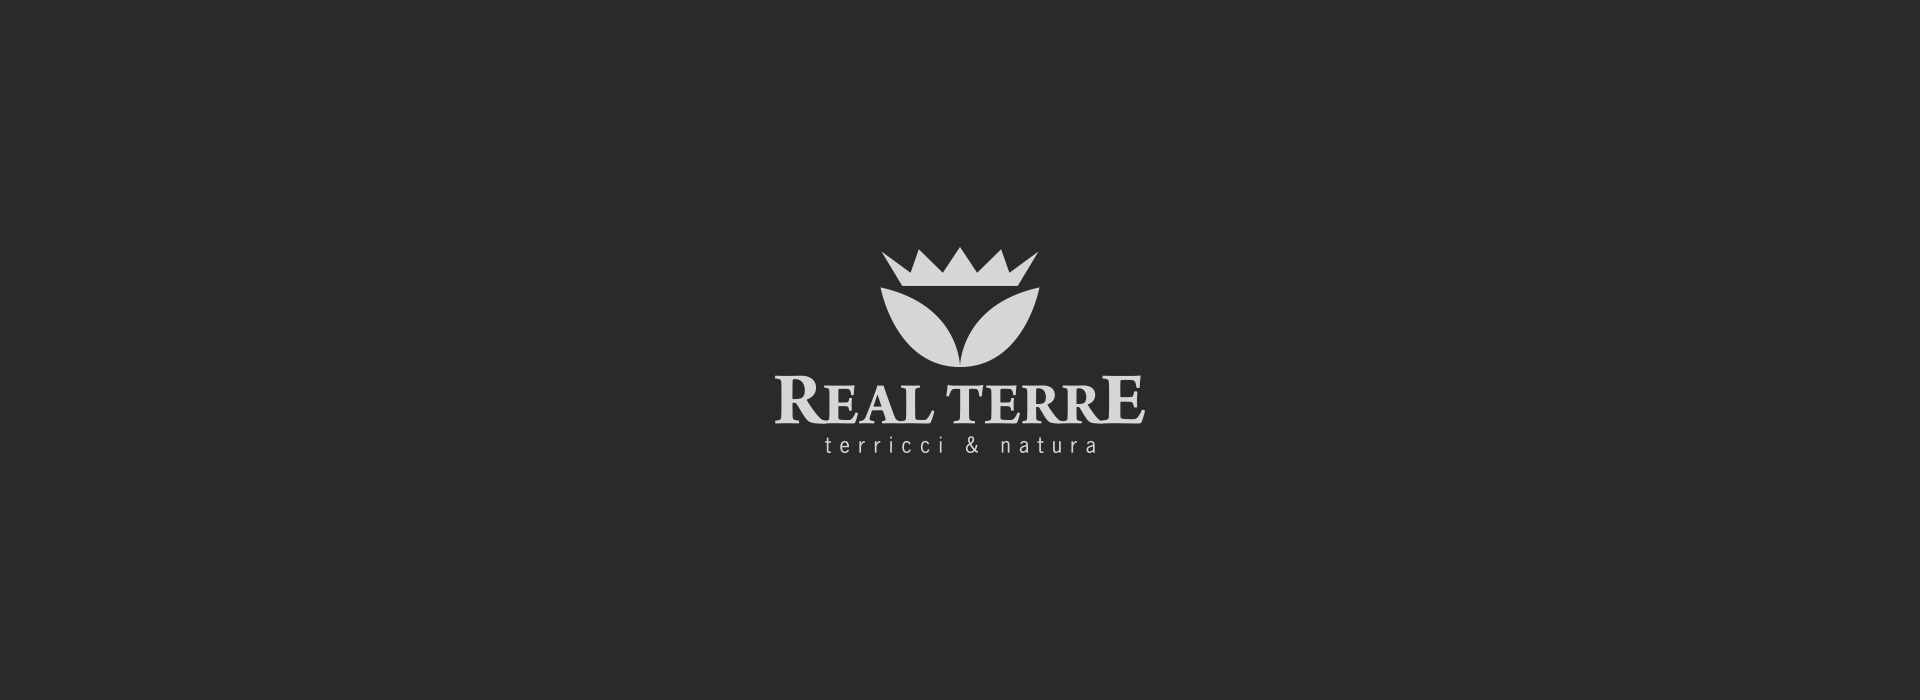 Real terre